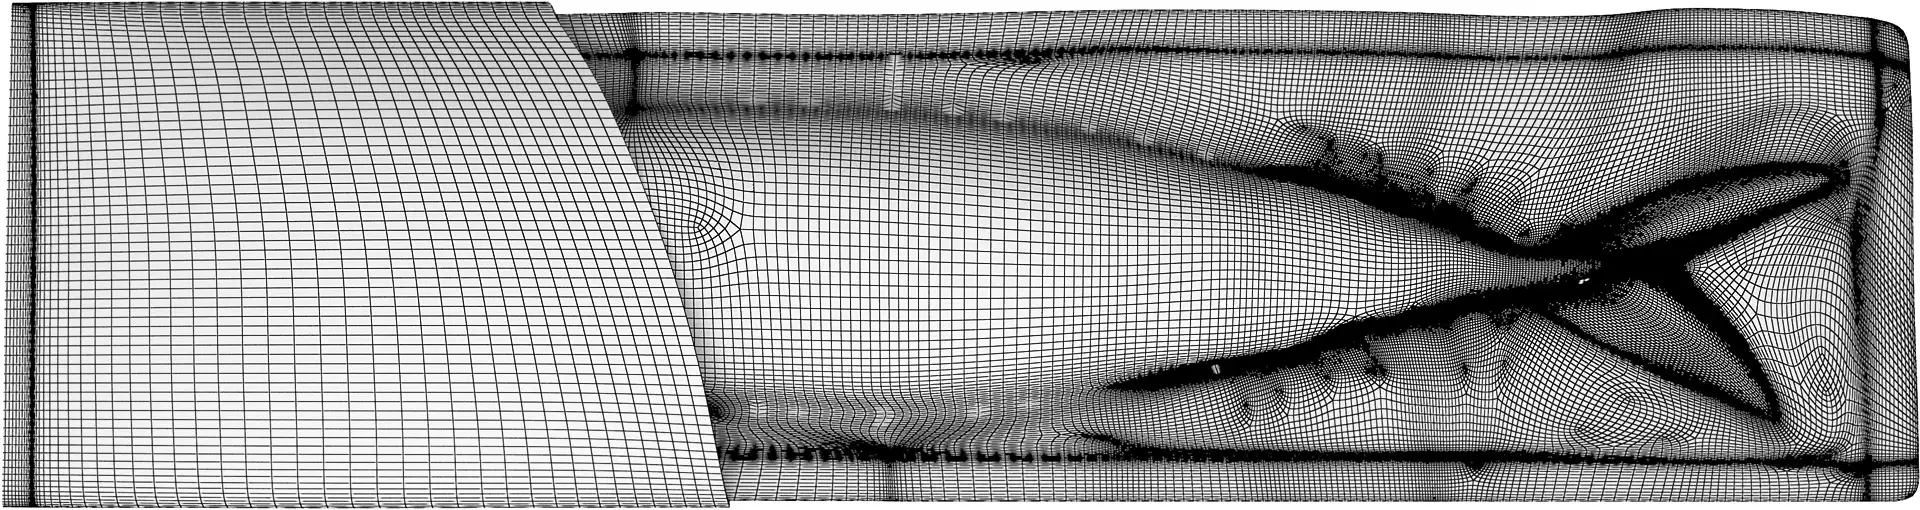 An example of 3D-visualization of a high-density mesh wireframe.